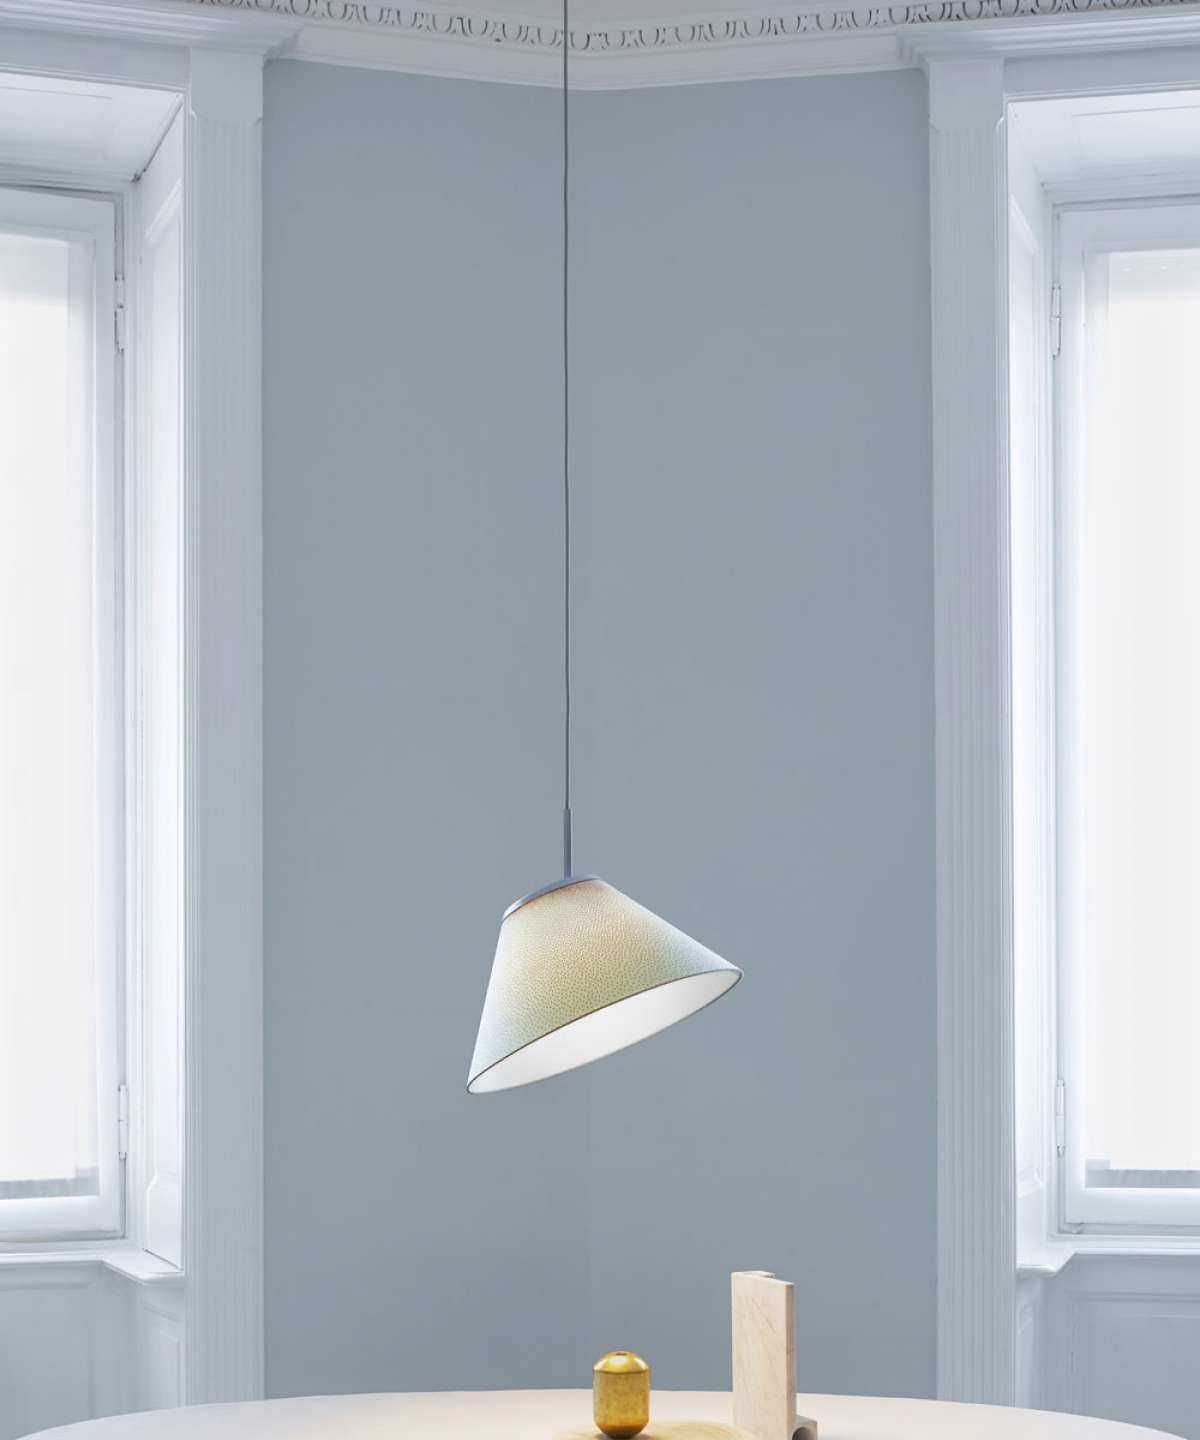 Pendant lamp Cappuccino by Luceplan